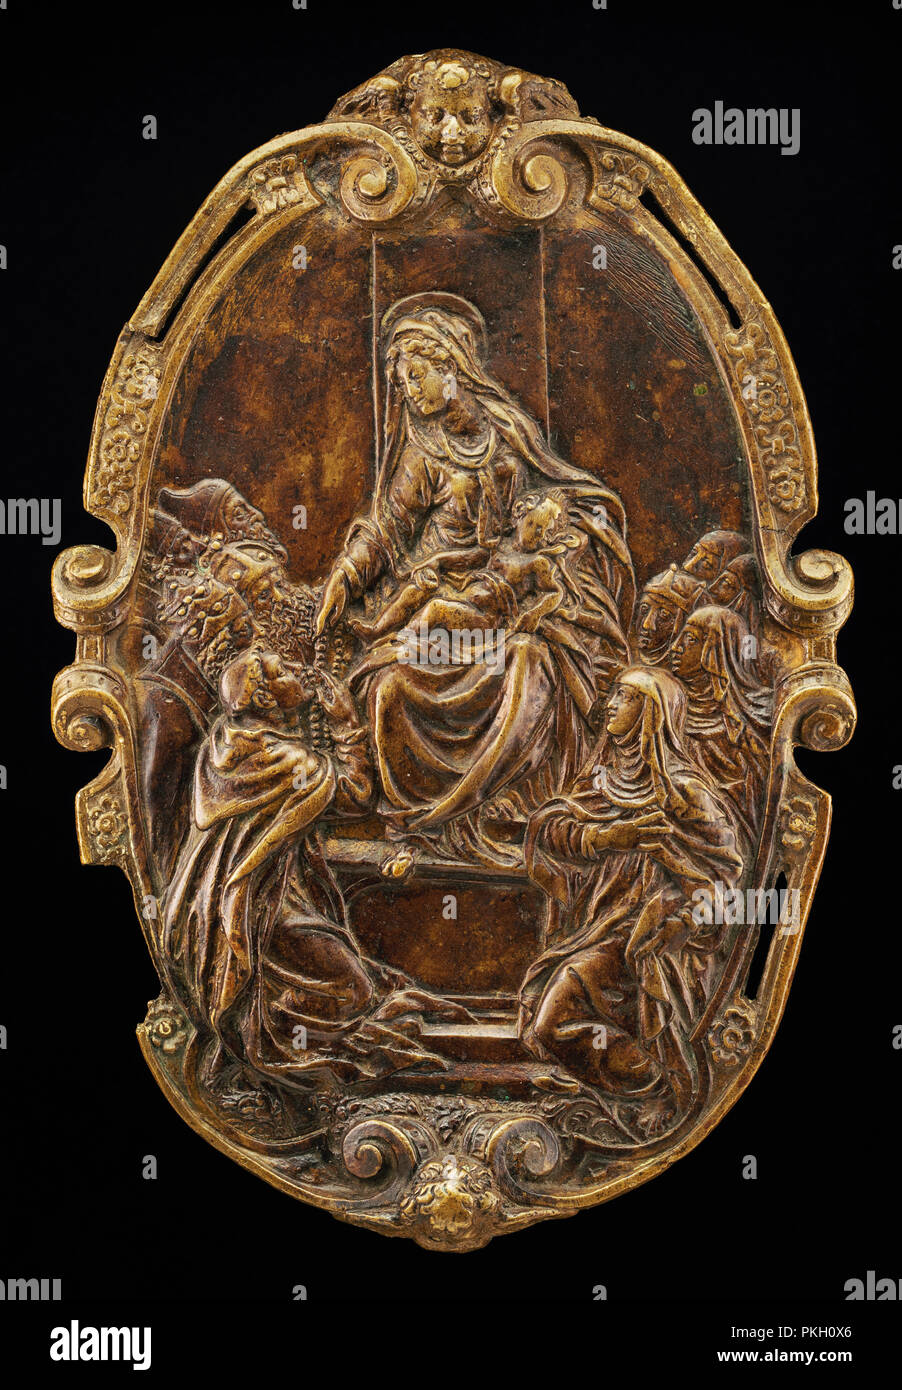 The Madonna of the Rosary. Dated: mid 16th century. Dimensions: overall (oval): 14.8 x 9.9 cm (5 13/16 x 3 7/8 in.) gross weight: 216 gr. Medium: bronze. Museum: National Gallery of Art, Washington DC. Author: Style of Jacopo Sansovino. Stock Photo